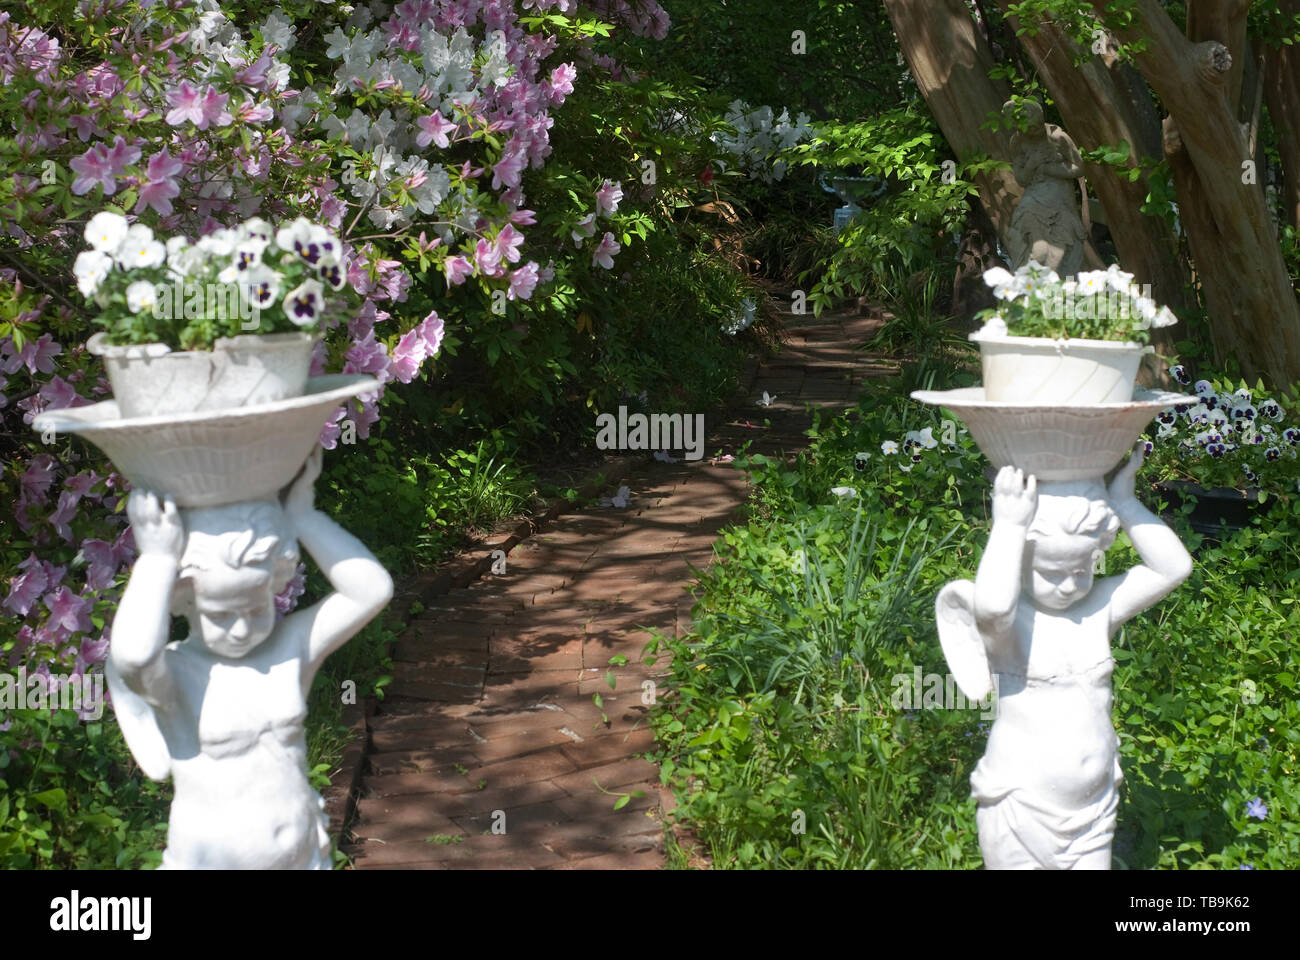 Concrete planters bearing pansies flank a shady, azalea-lined path in the gardens of Rosewood Manor in Columbus, Mississippi, April 16, 2010. Stock Photo